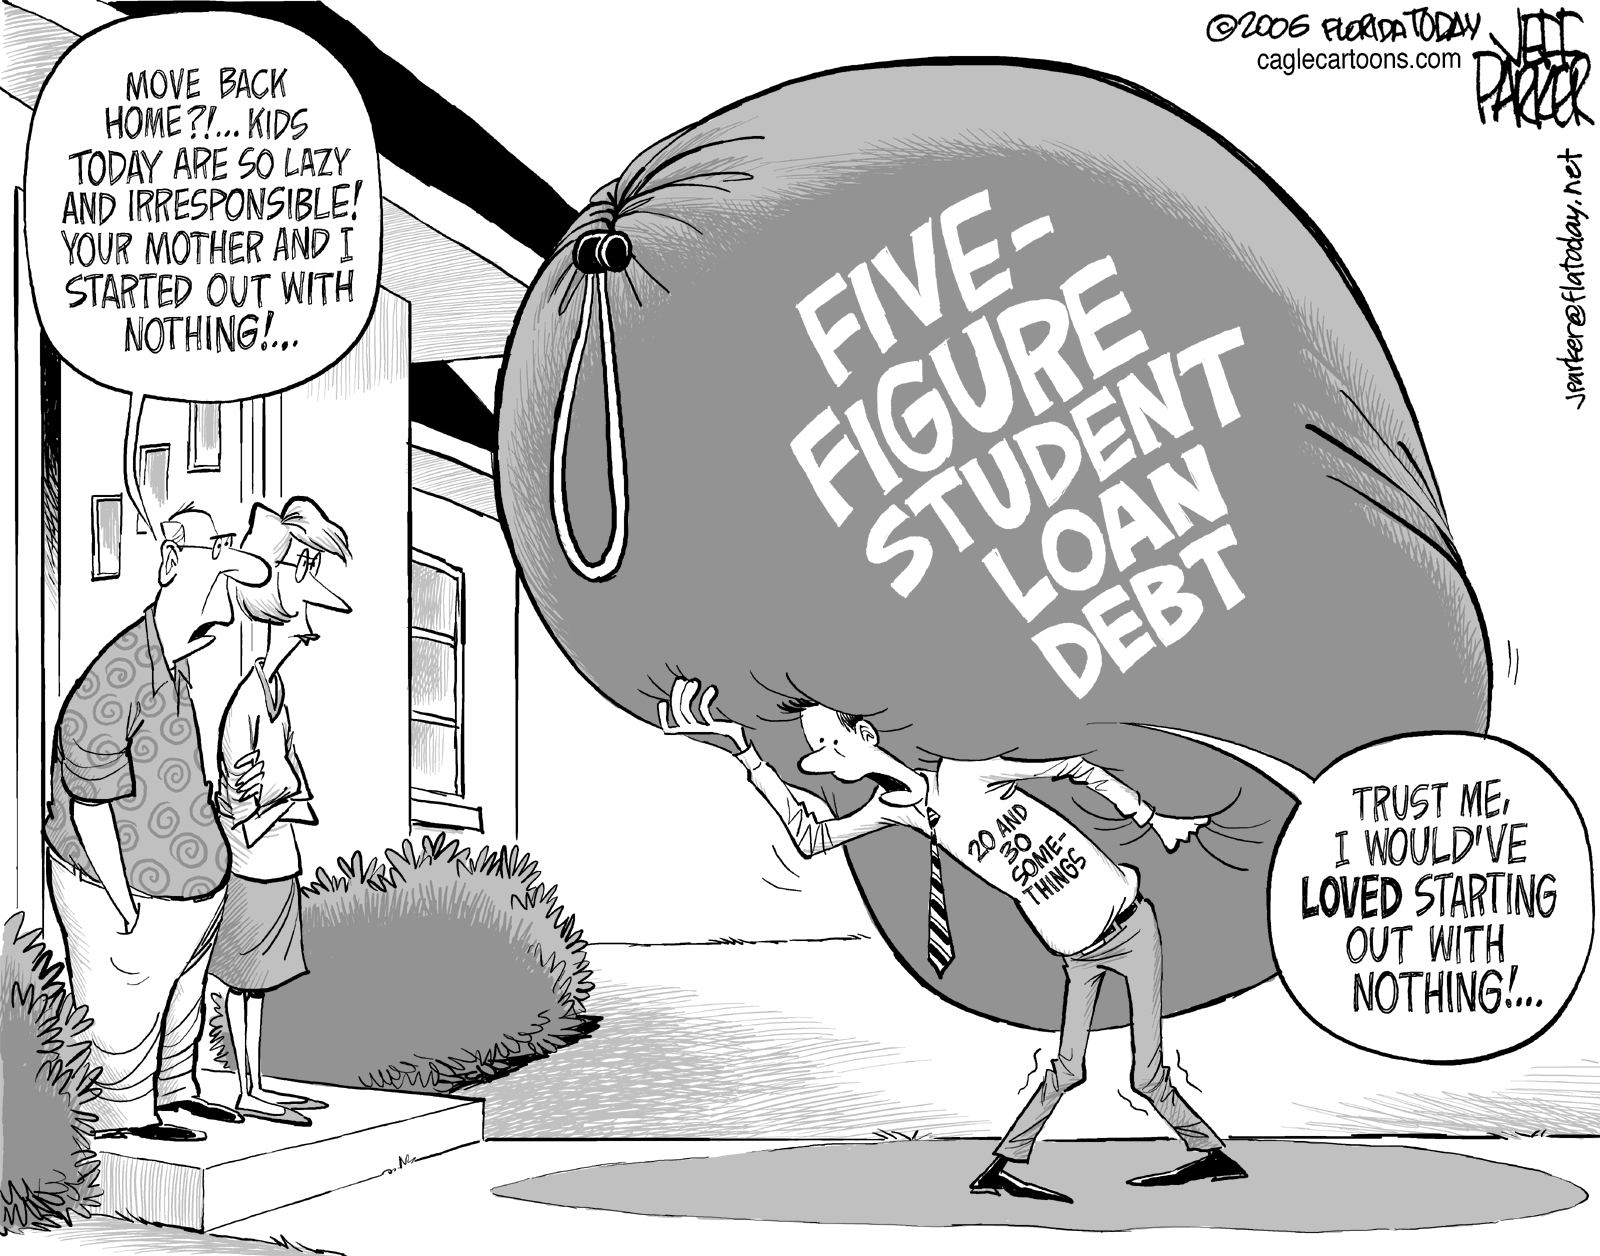 Jobsanger  Deal On Student Loans  Maybe